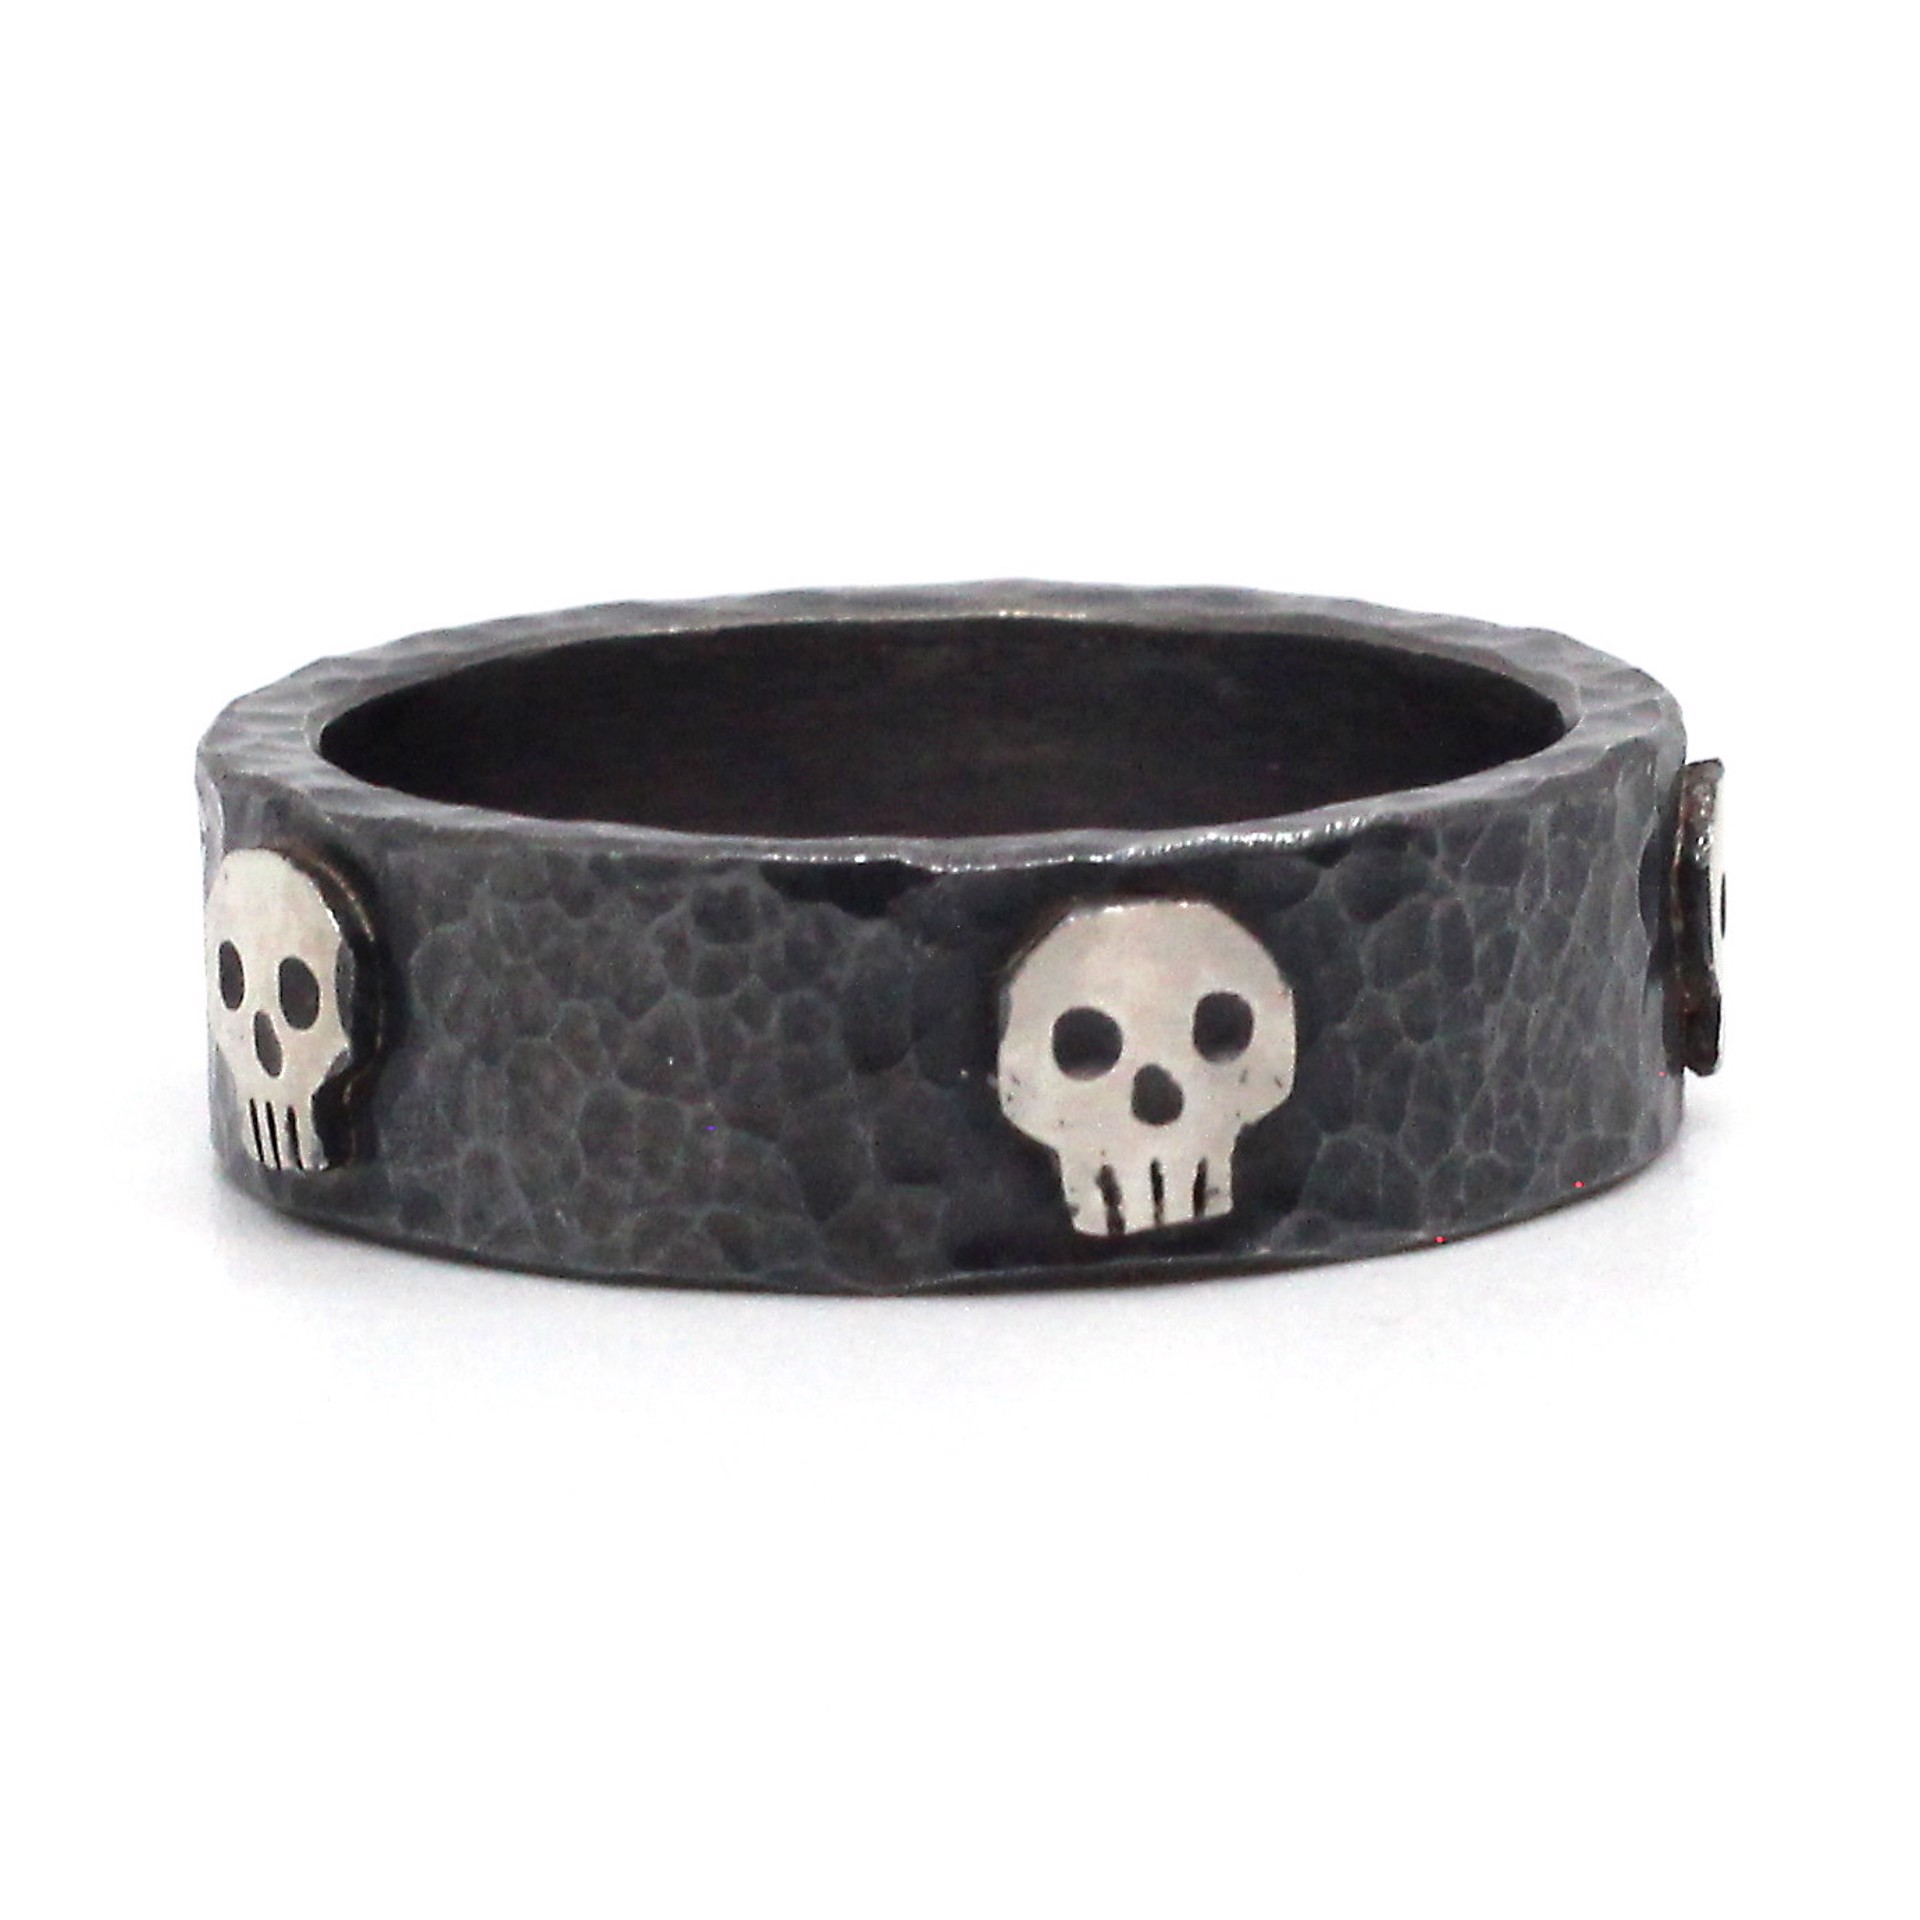 5-Skull Ring (size 10.5) by Susan Elnora